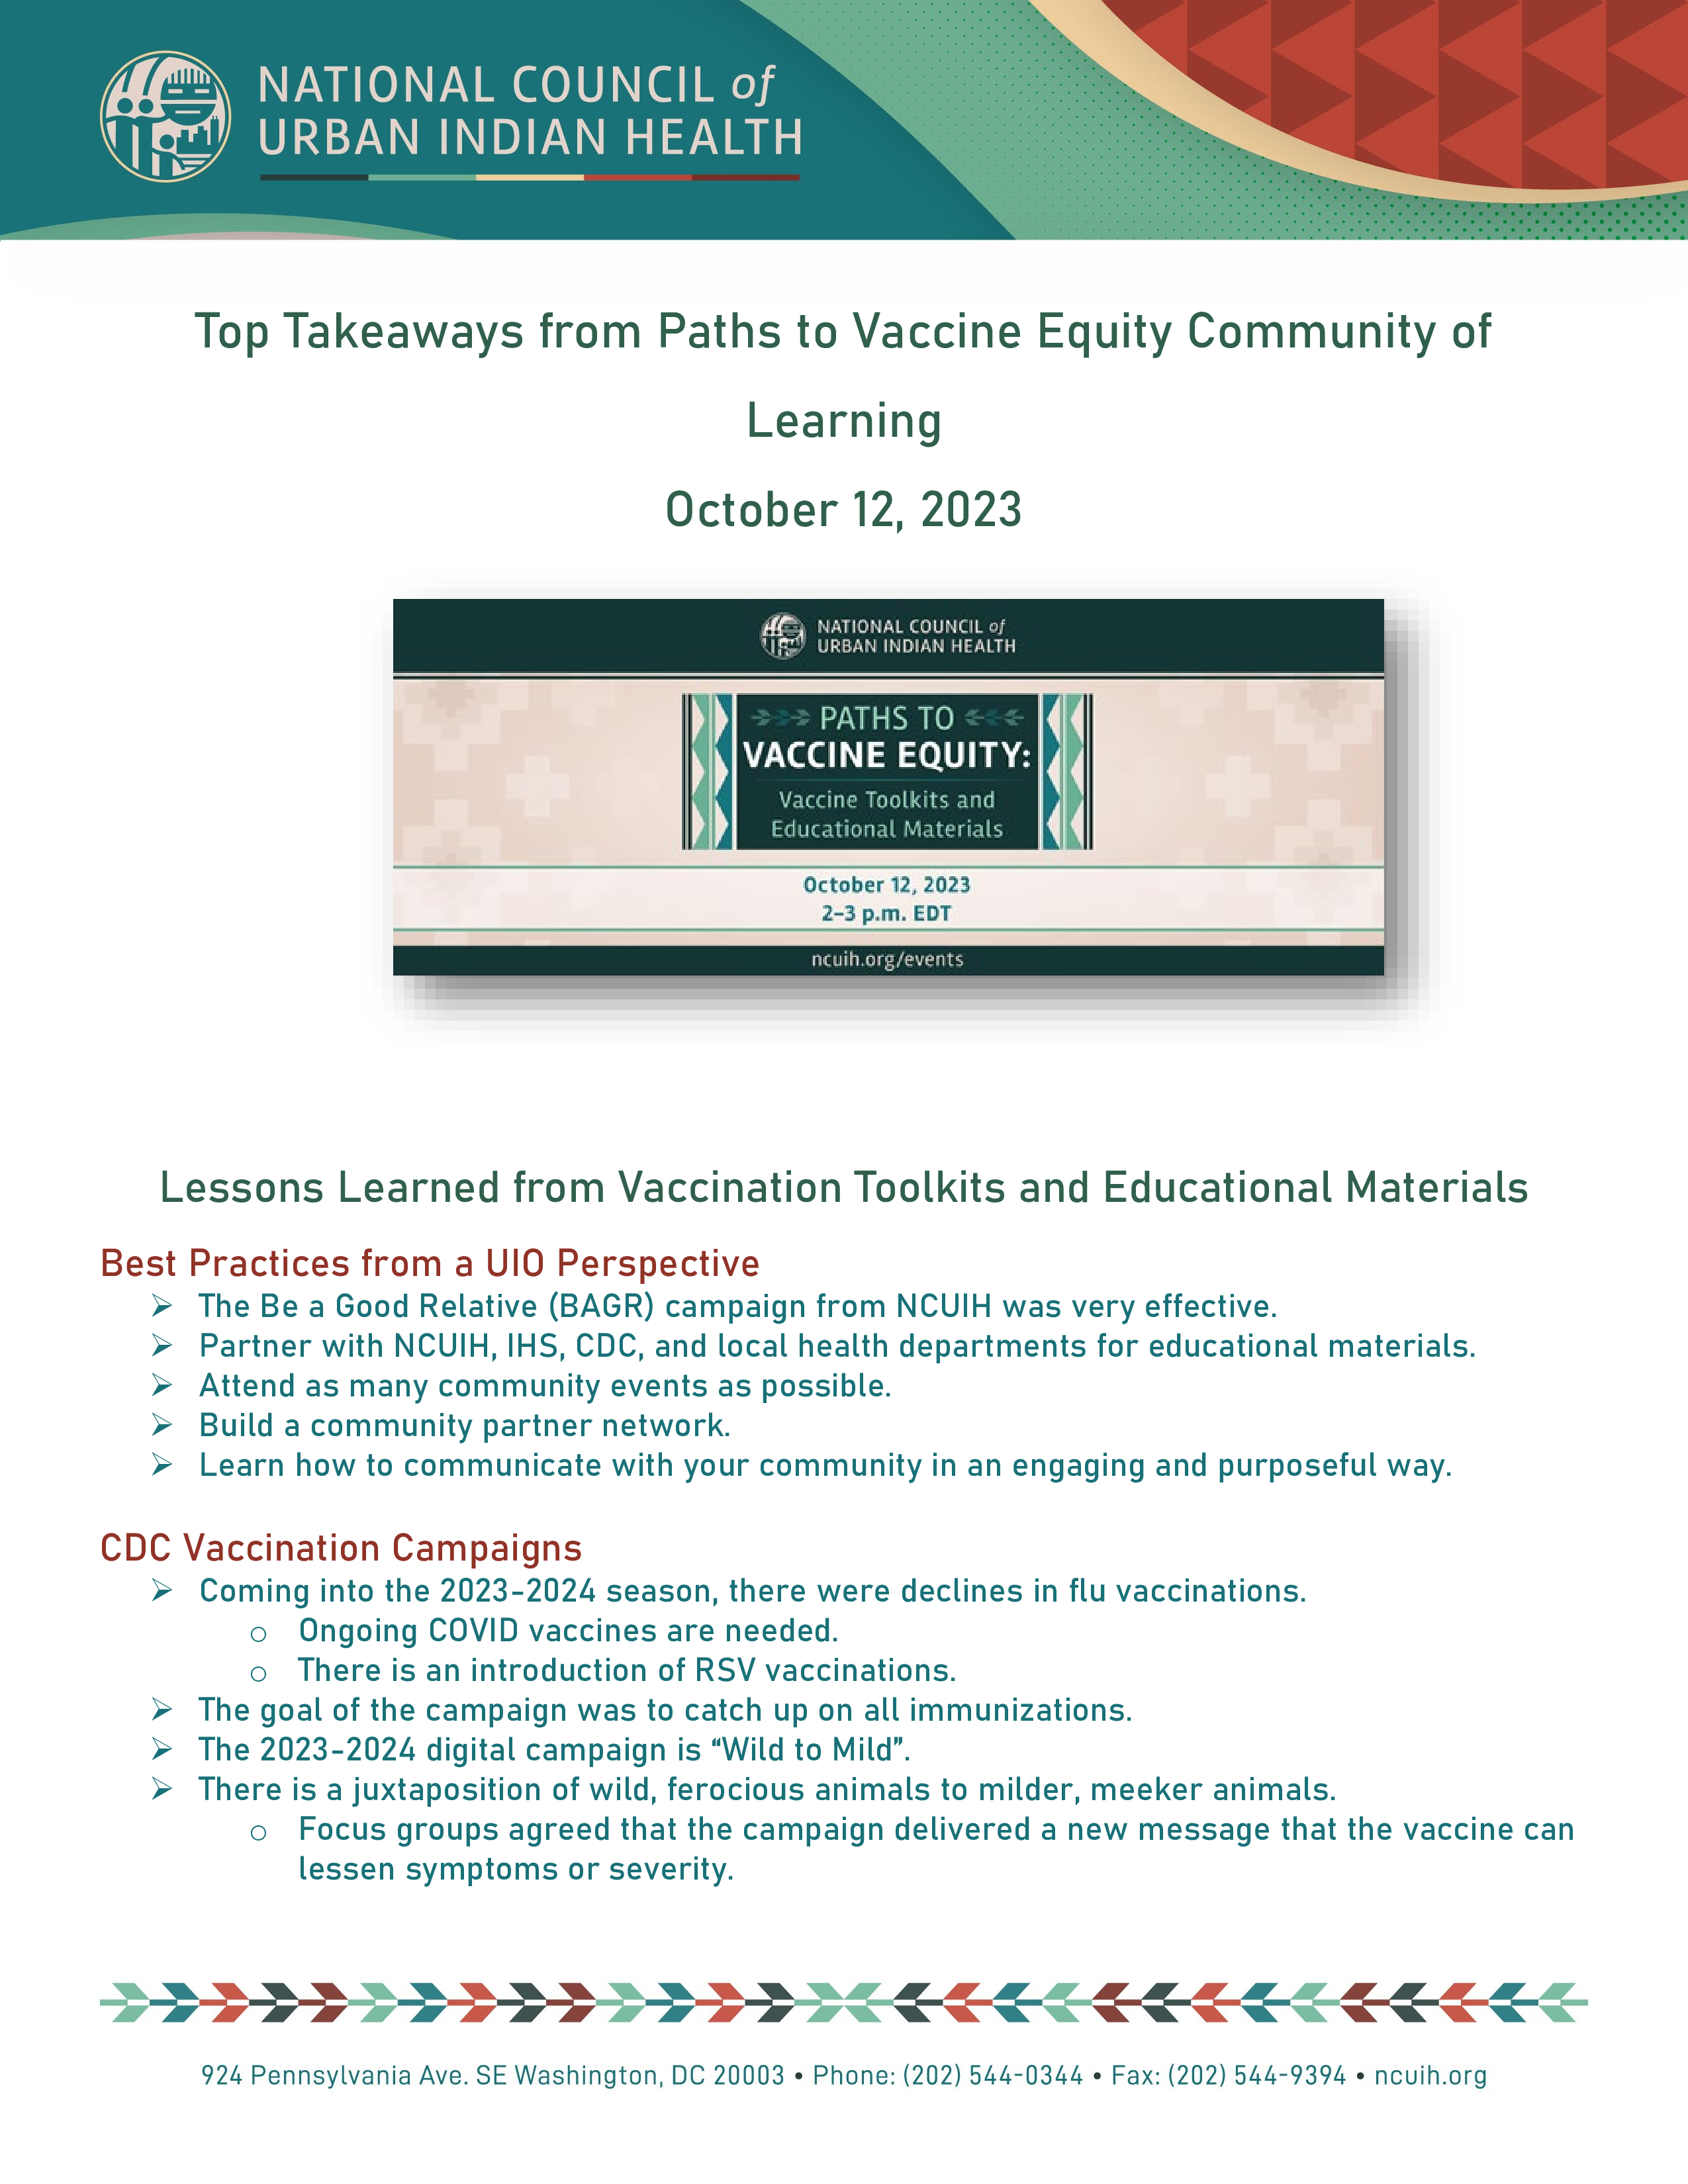 PDF reads 'top takeaways from paths to vaccine equity community of learning'